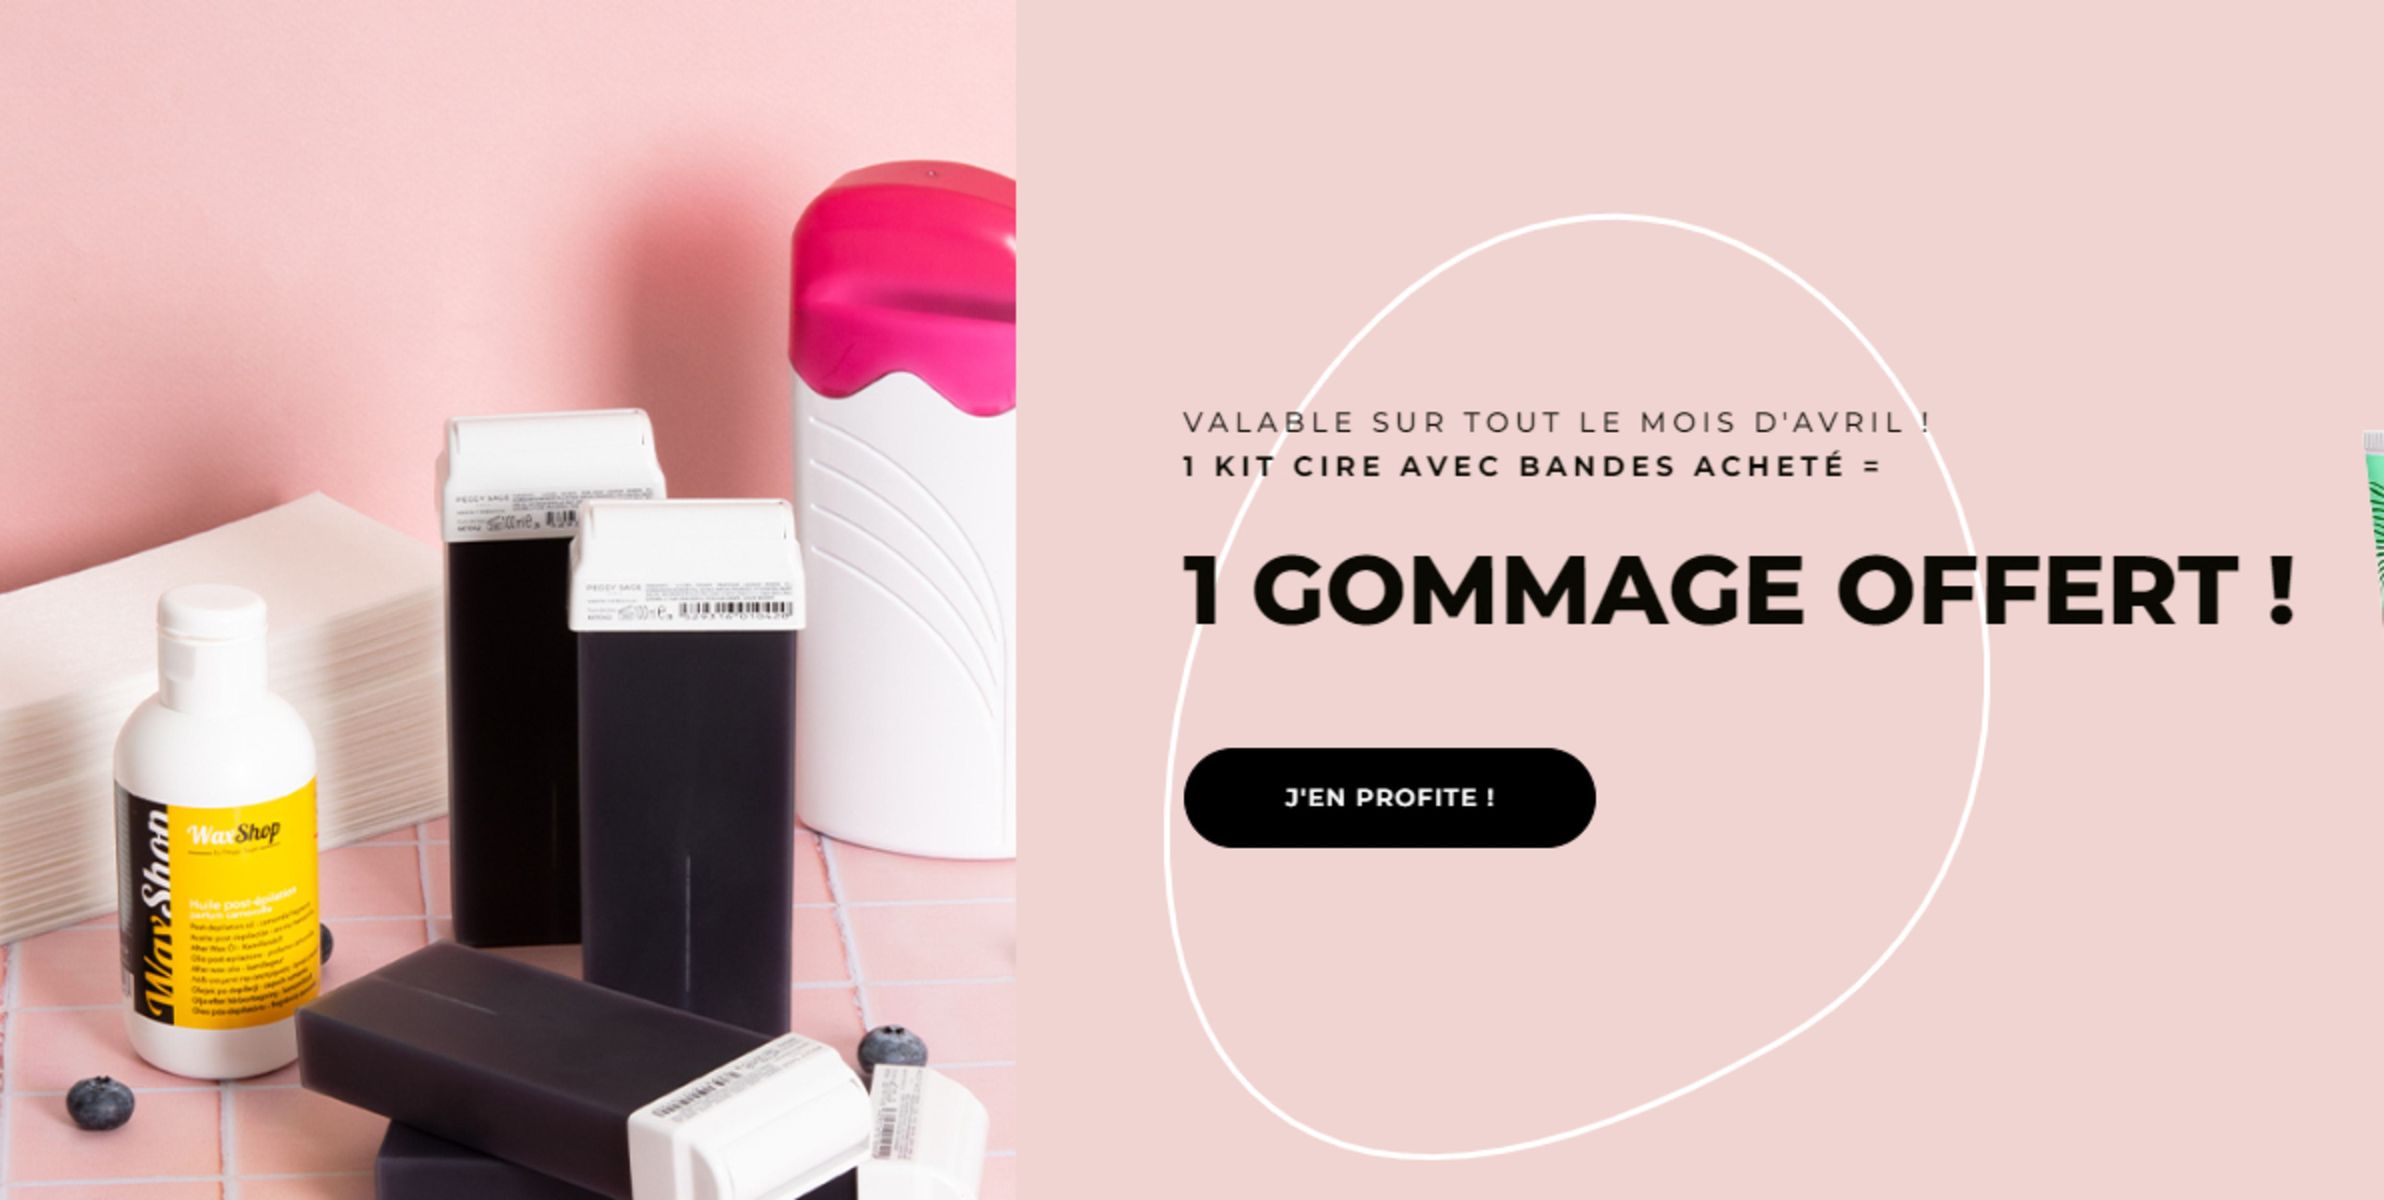 Catalogue 1 GOMMAGE OFFERT !, page 00001